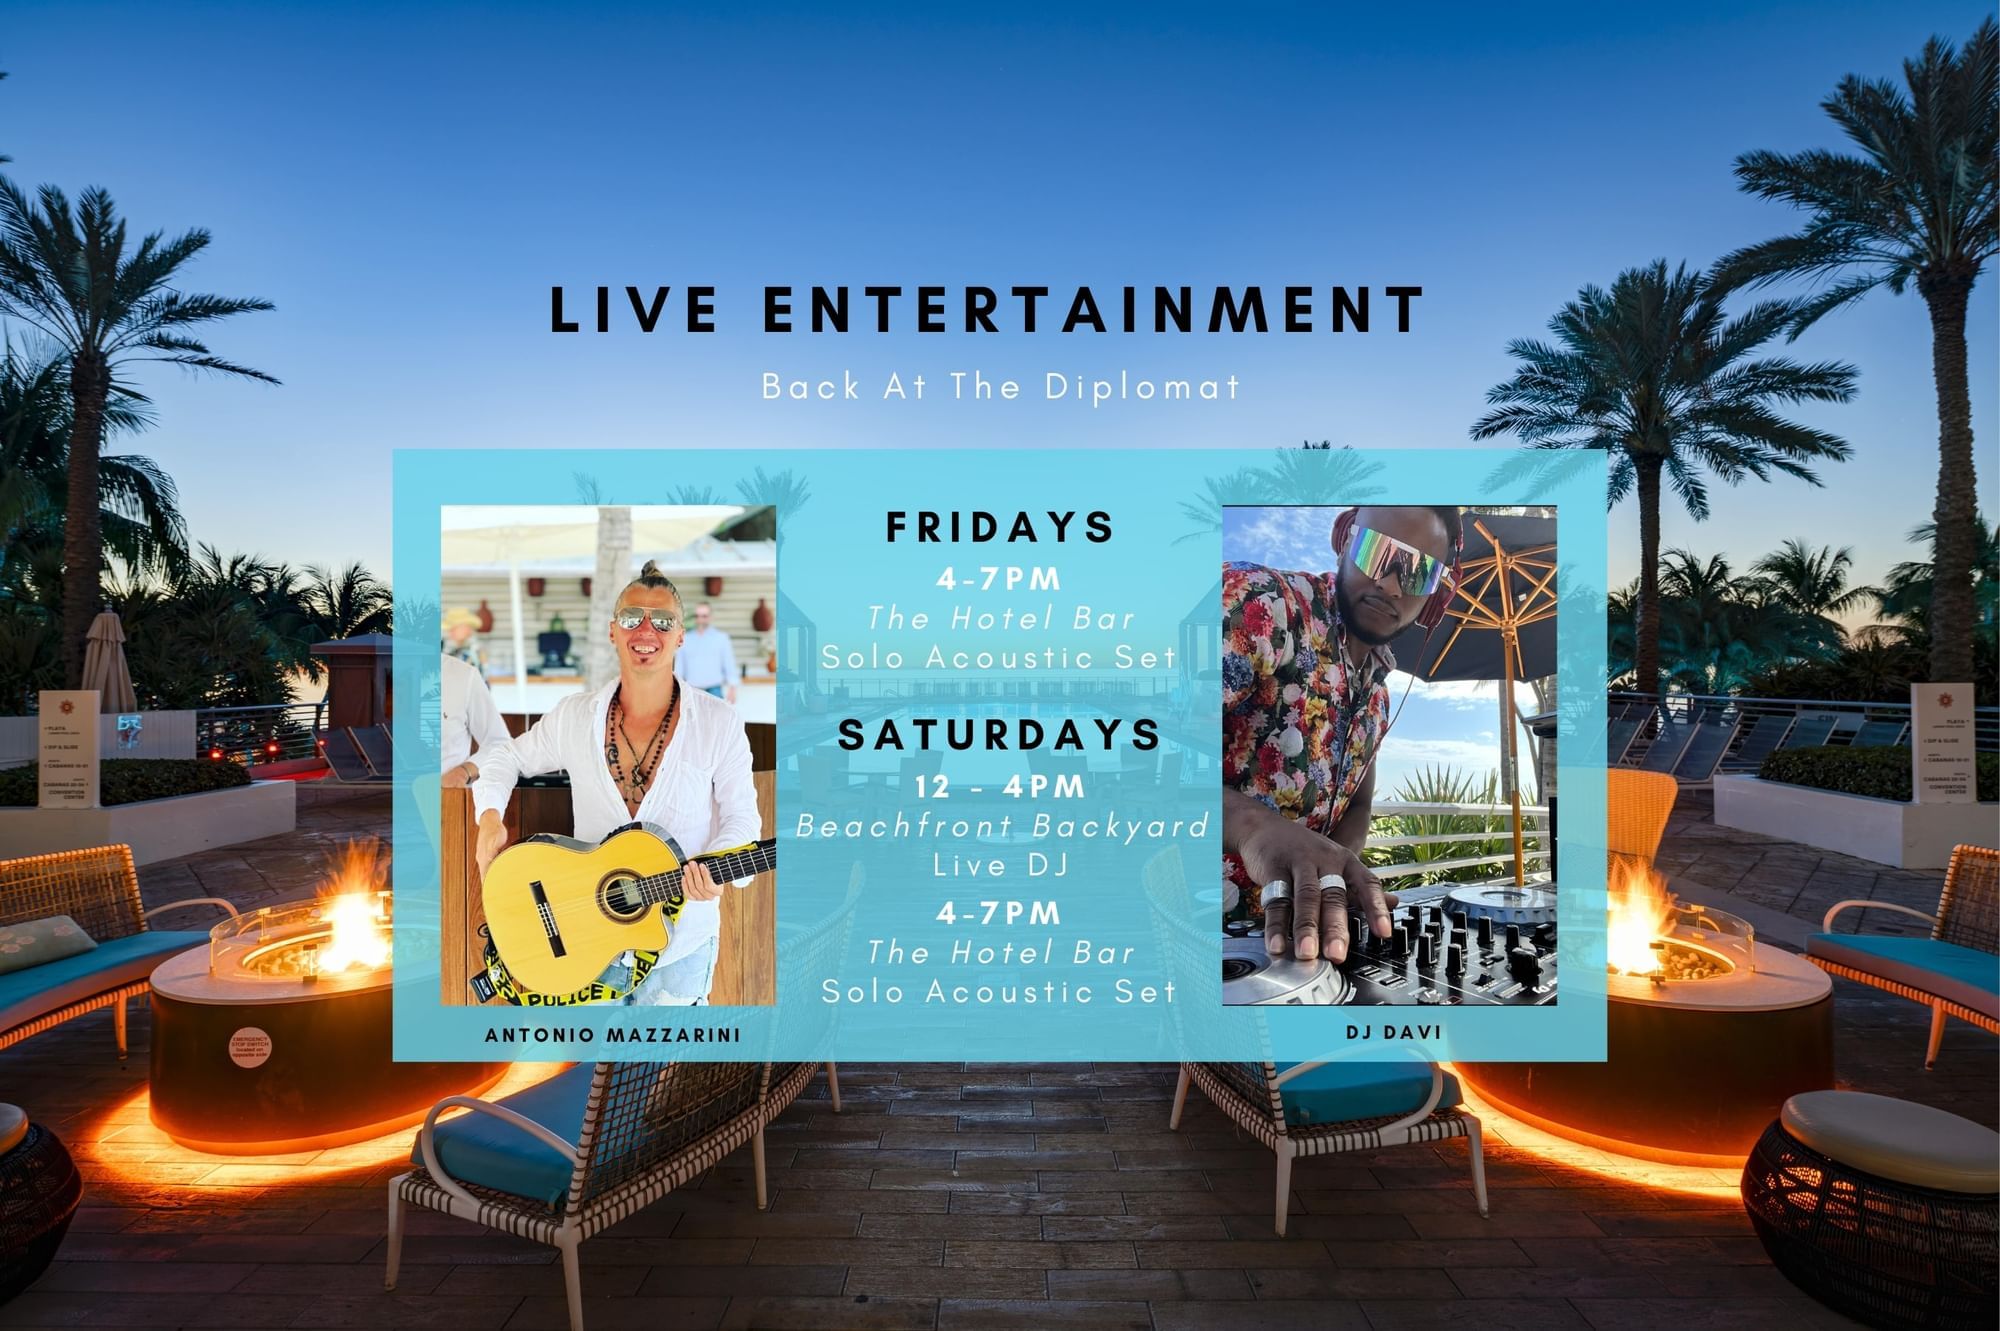 Live Entertainment Poster at The Diplomat Resort